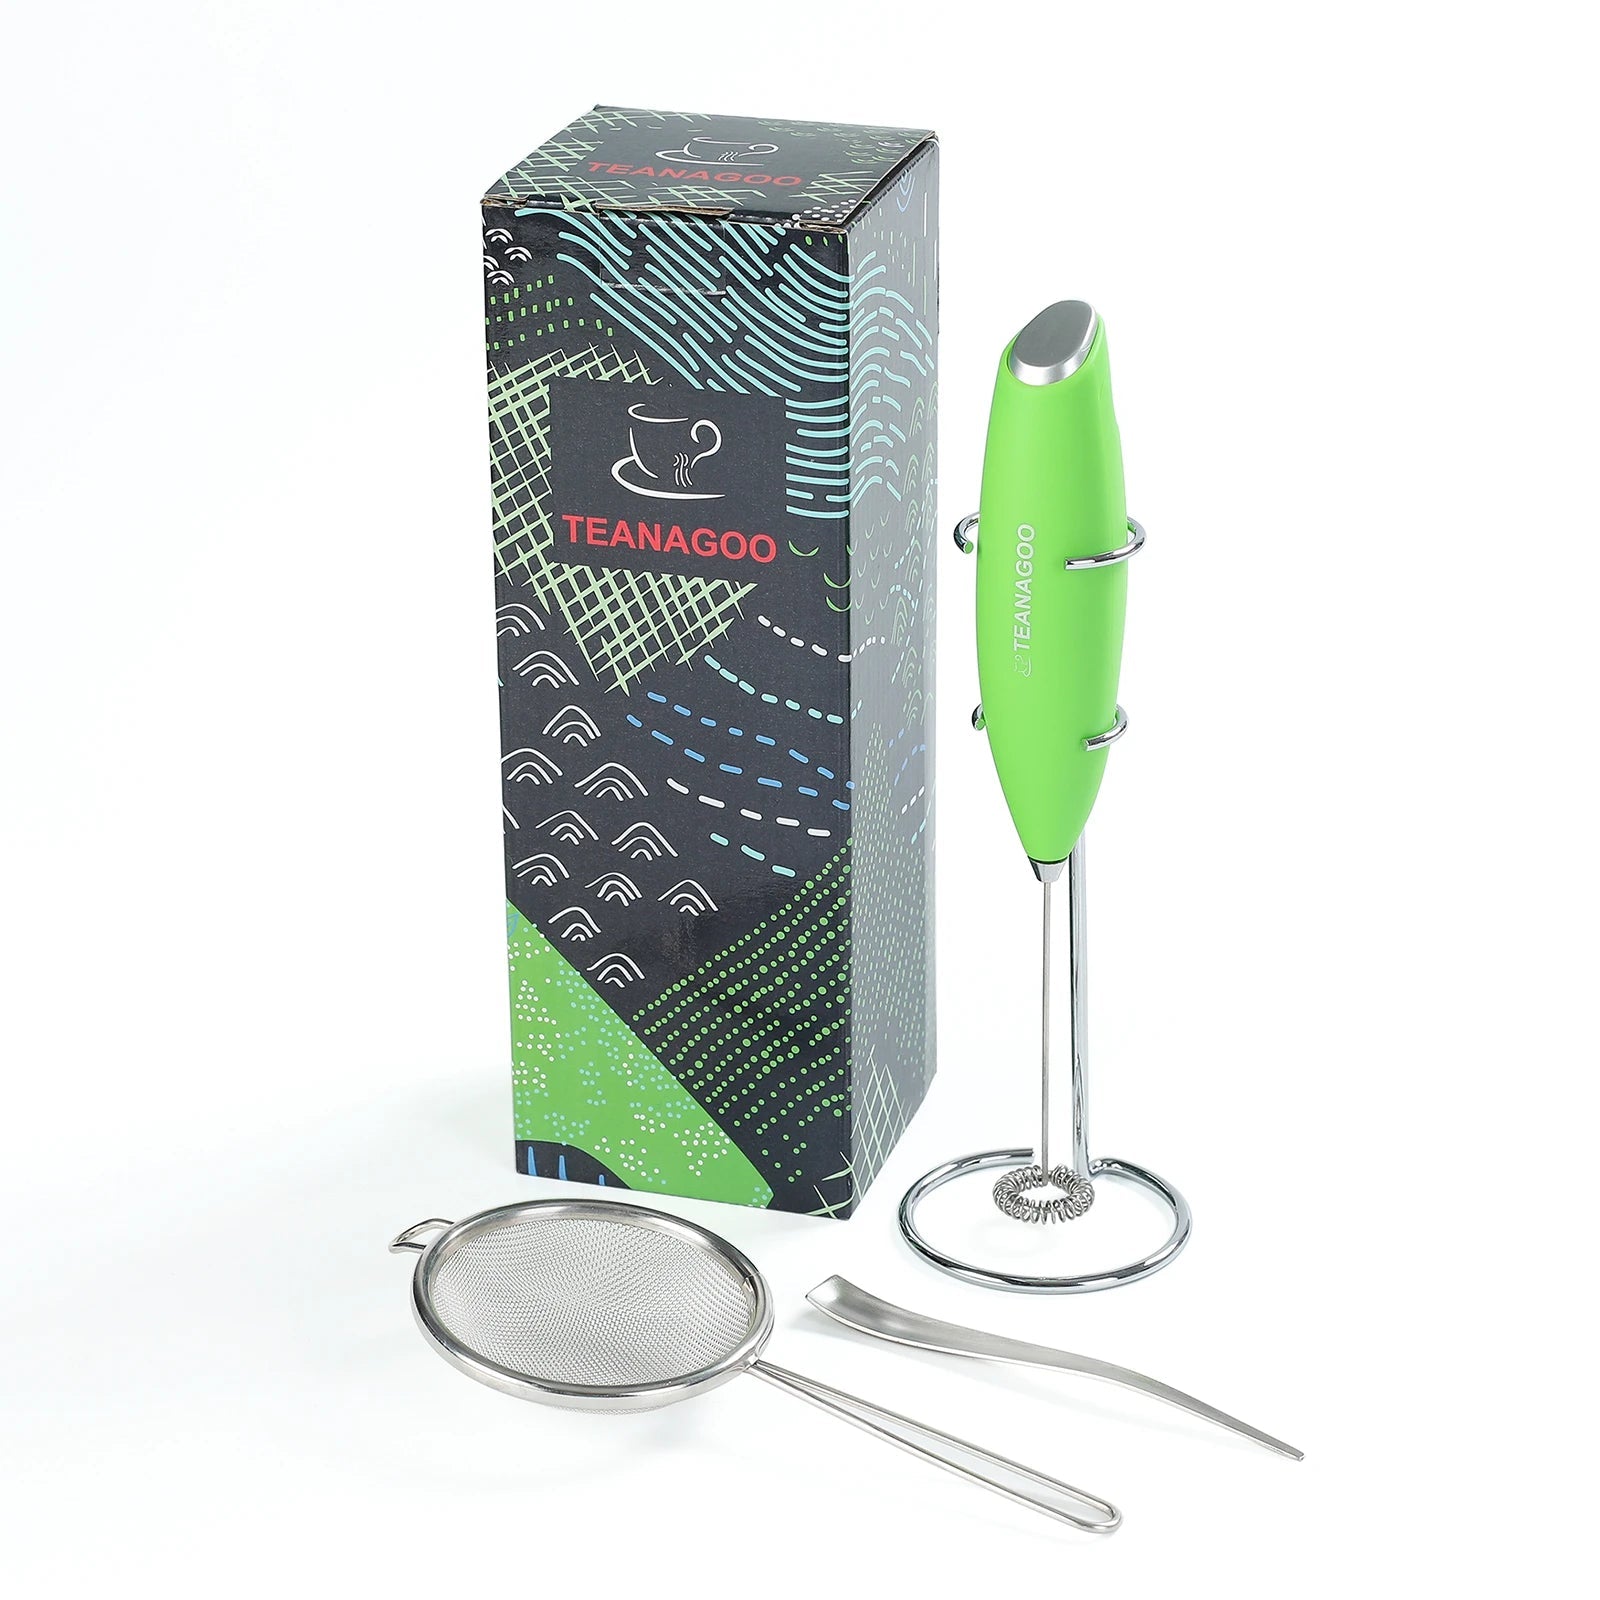 TEANAGOO Matcha Electric Whisk & Stand, Stainless Steel Scoop & Sifter,  Handbook. 5pcs/Set, Good for Matcha Starter. Matcha Whisk, Mini Whisk,  Frother